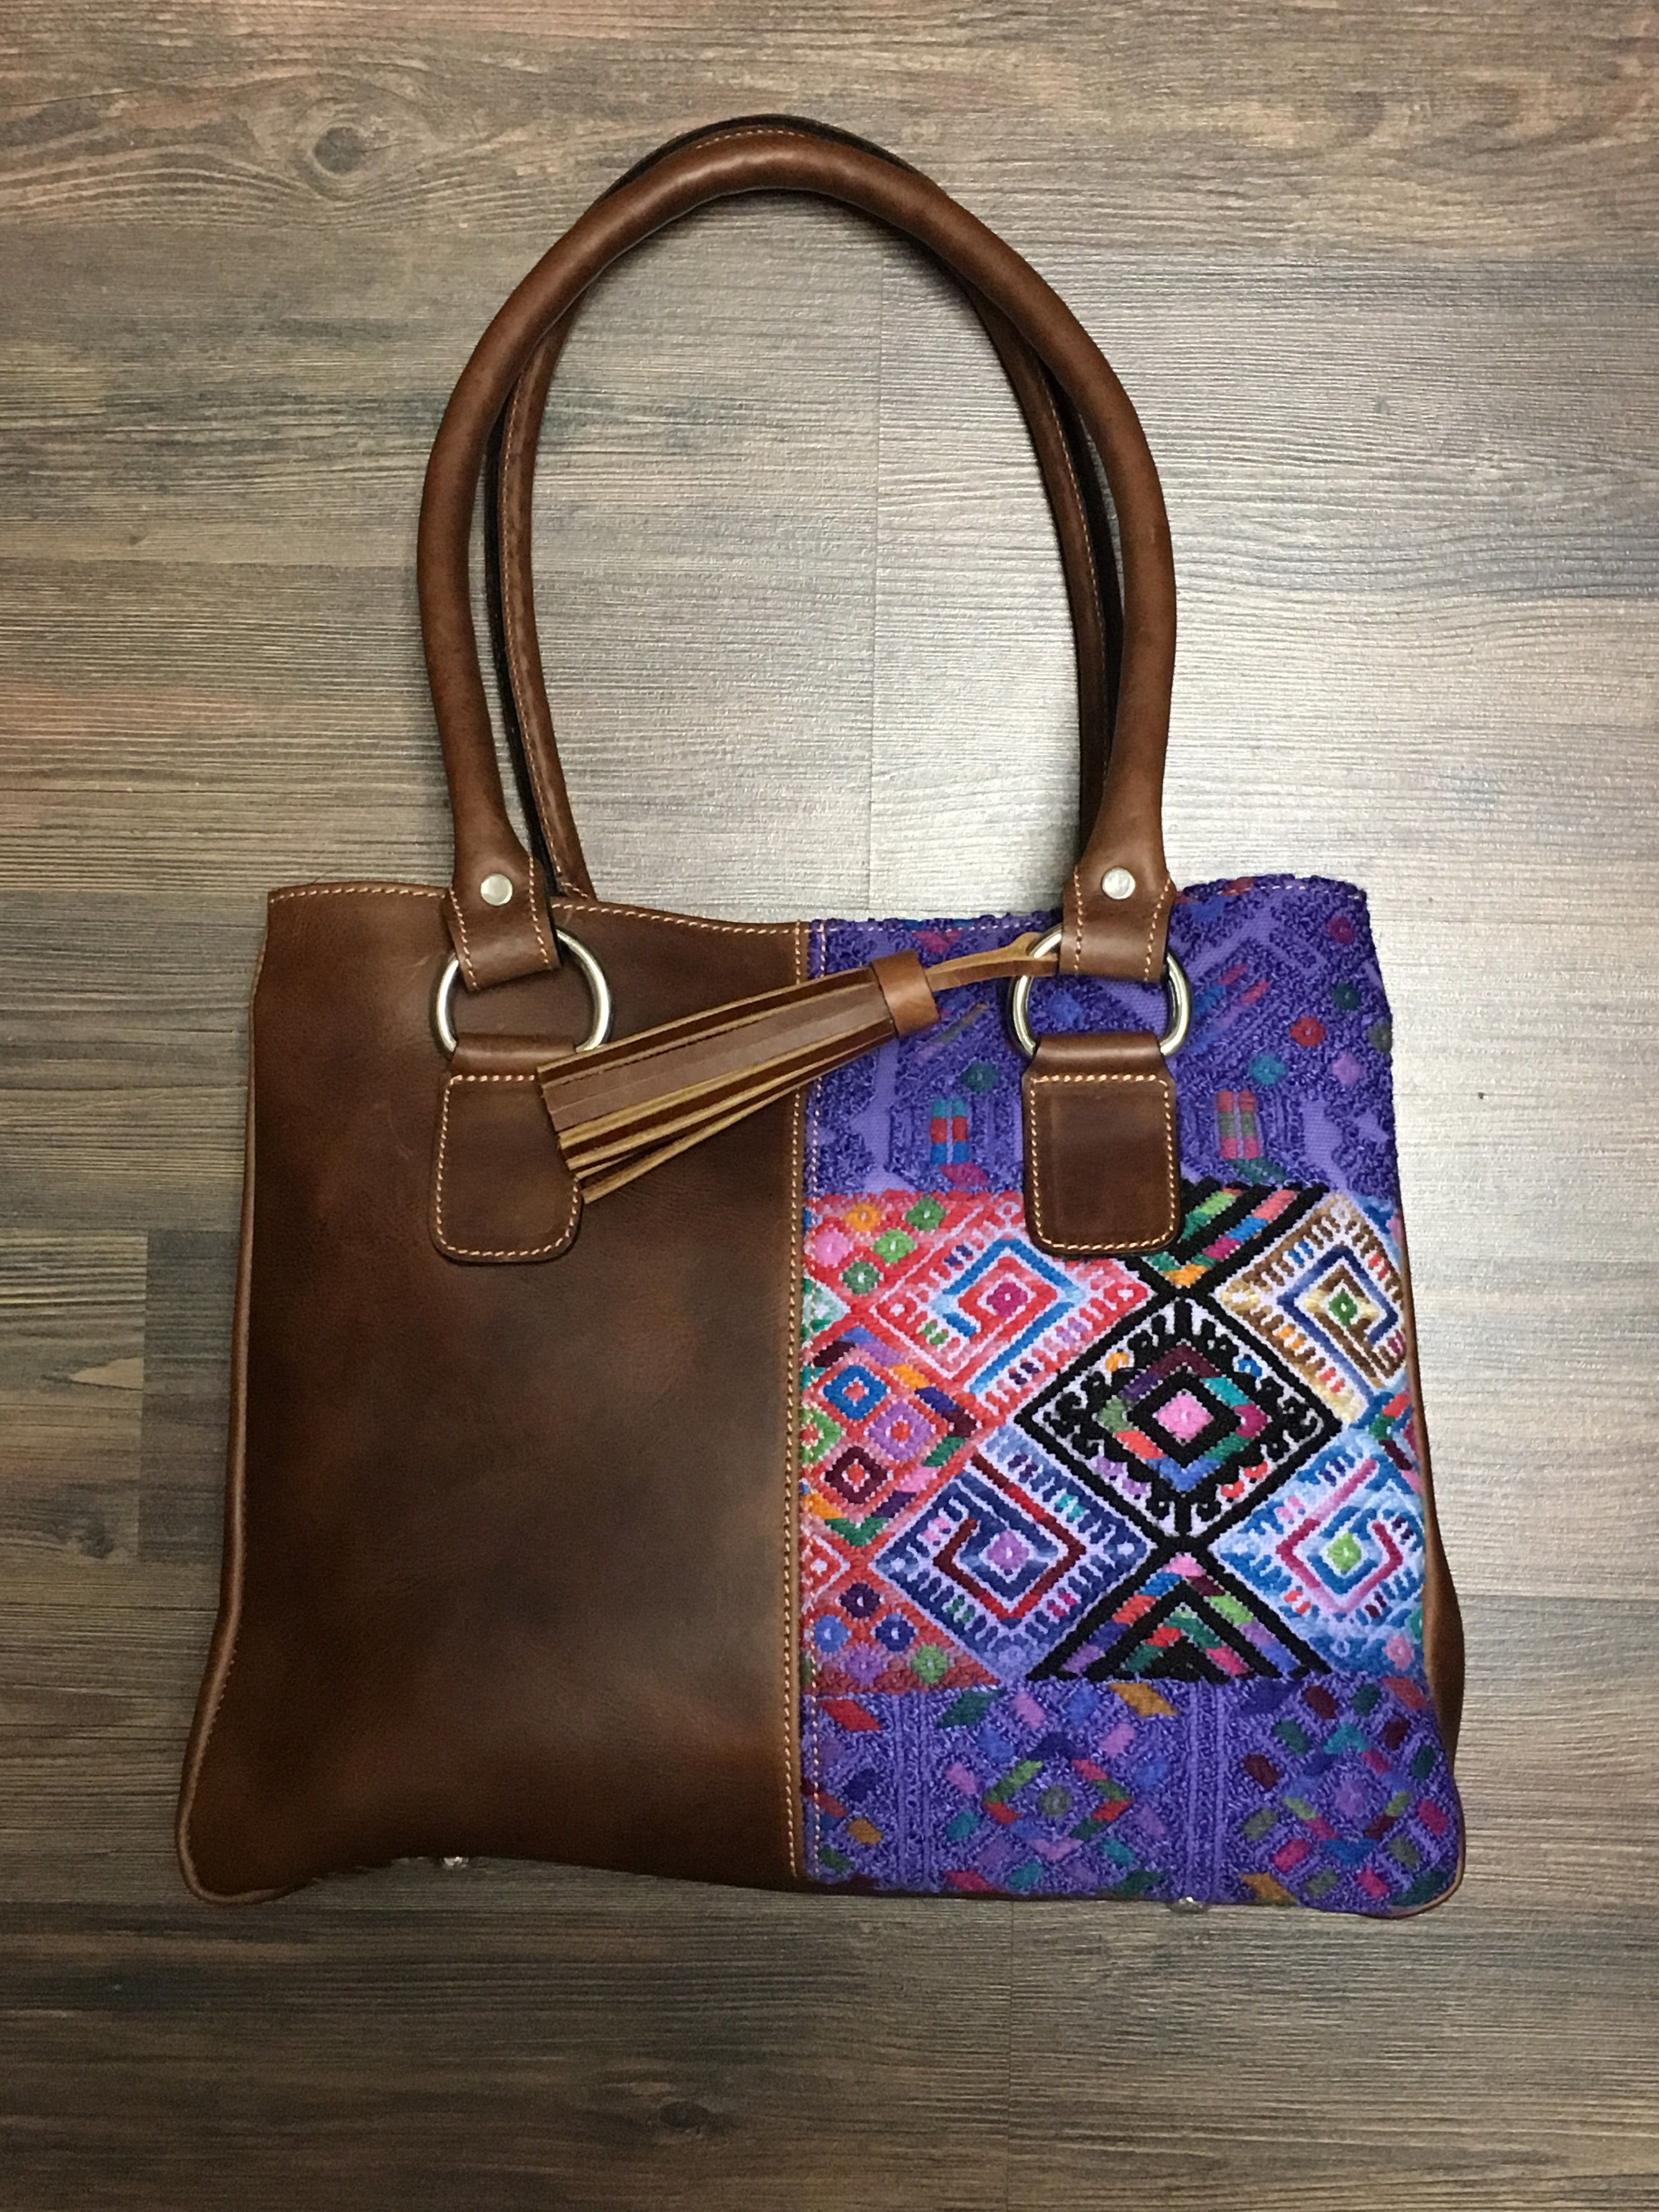 Playa Chi Chi - Leather & Huipil Luxury Bag! Double Pockets!